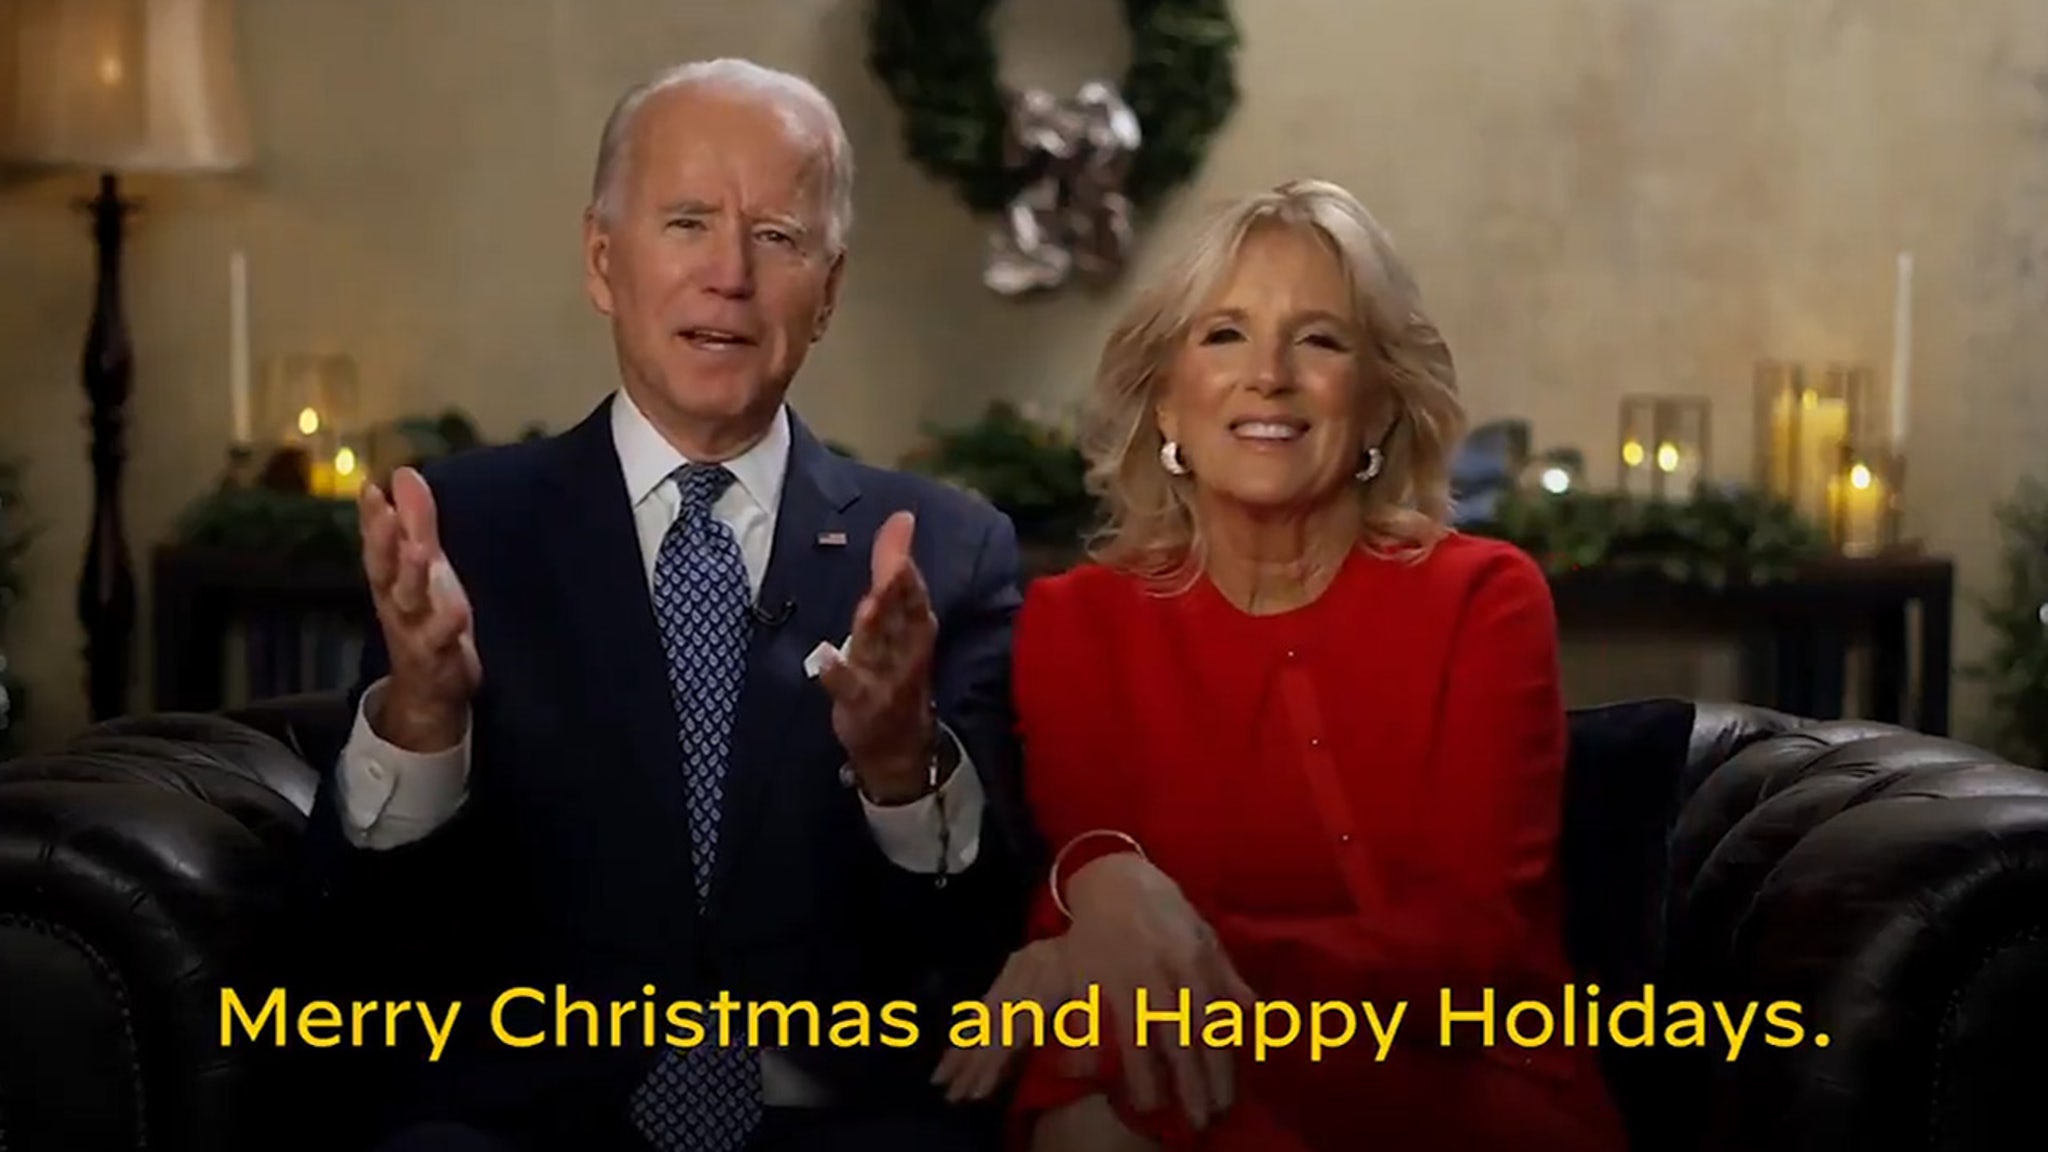 Joe and Jill Biden's Christmas Message that 'Brighter Days are Coming Soon'